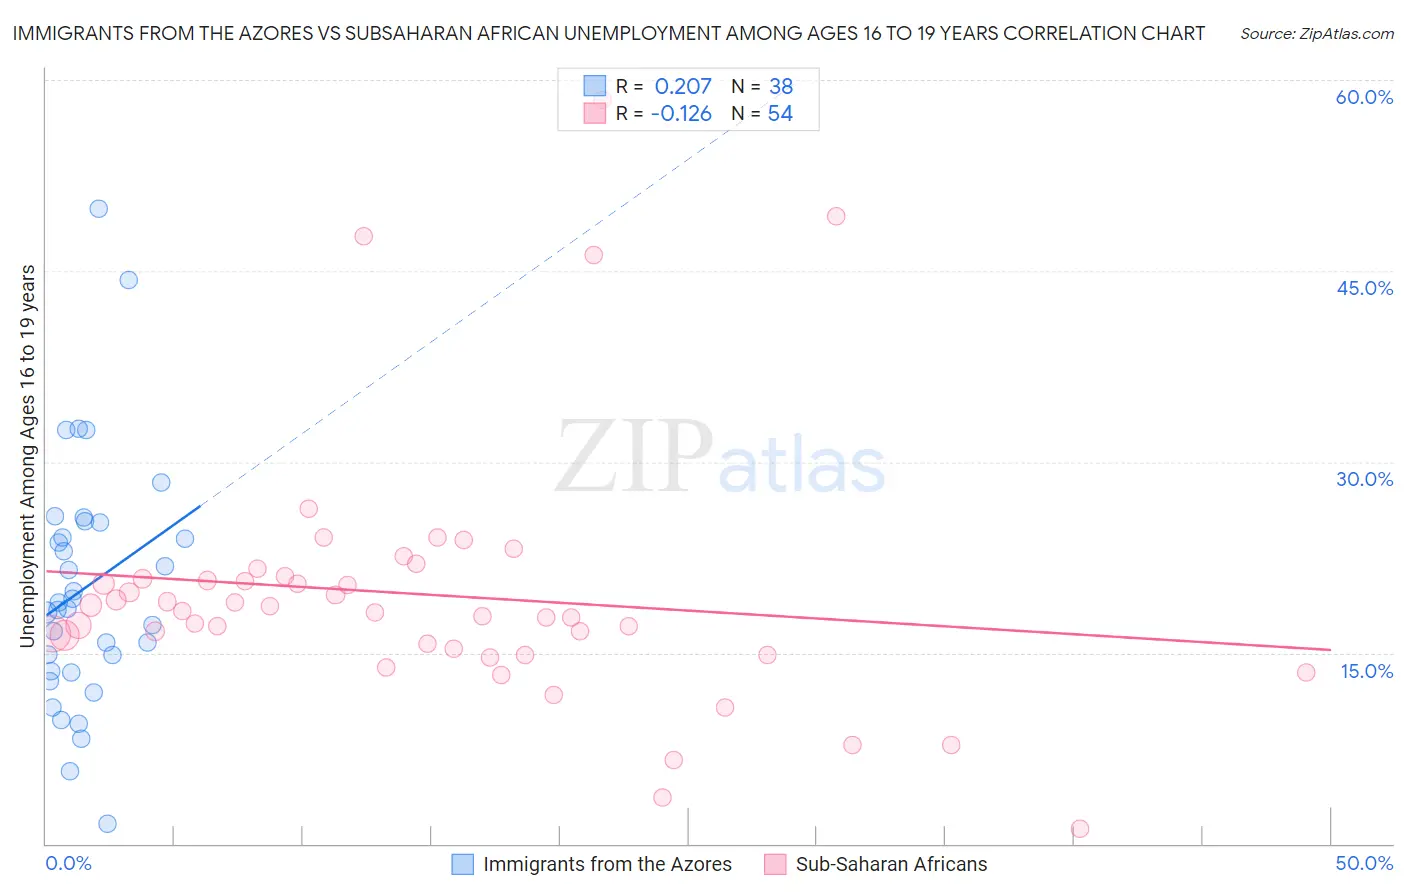 Immigrants from the Azores vs Subsaharan African Unemployment Among Ages 16 to 19 years